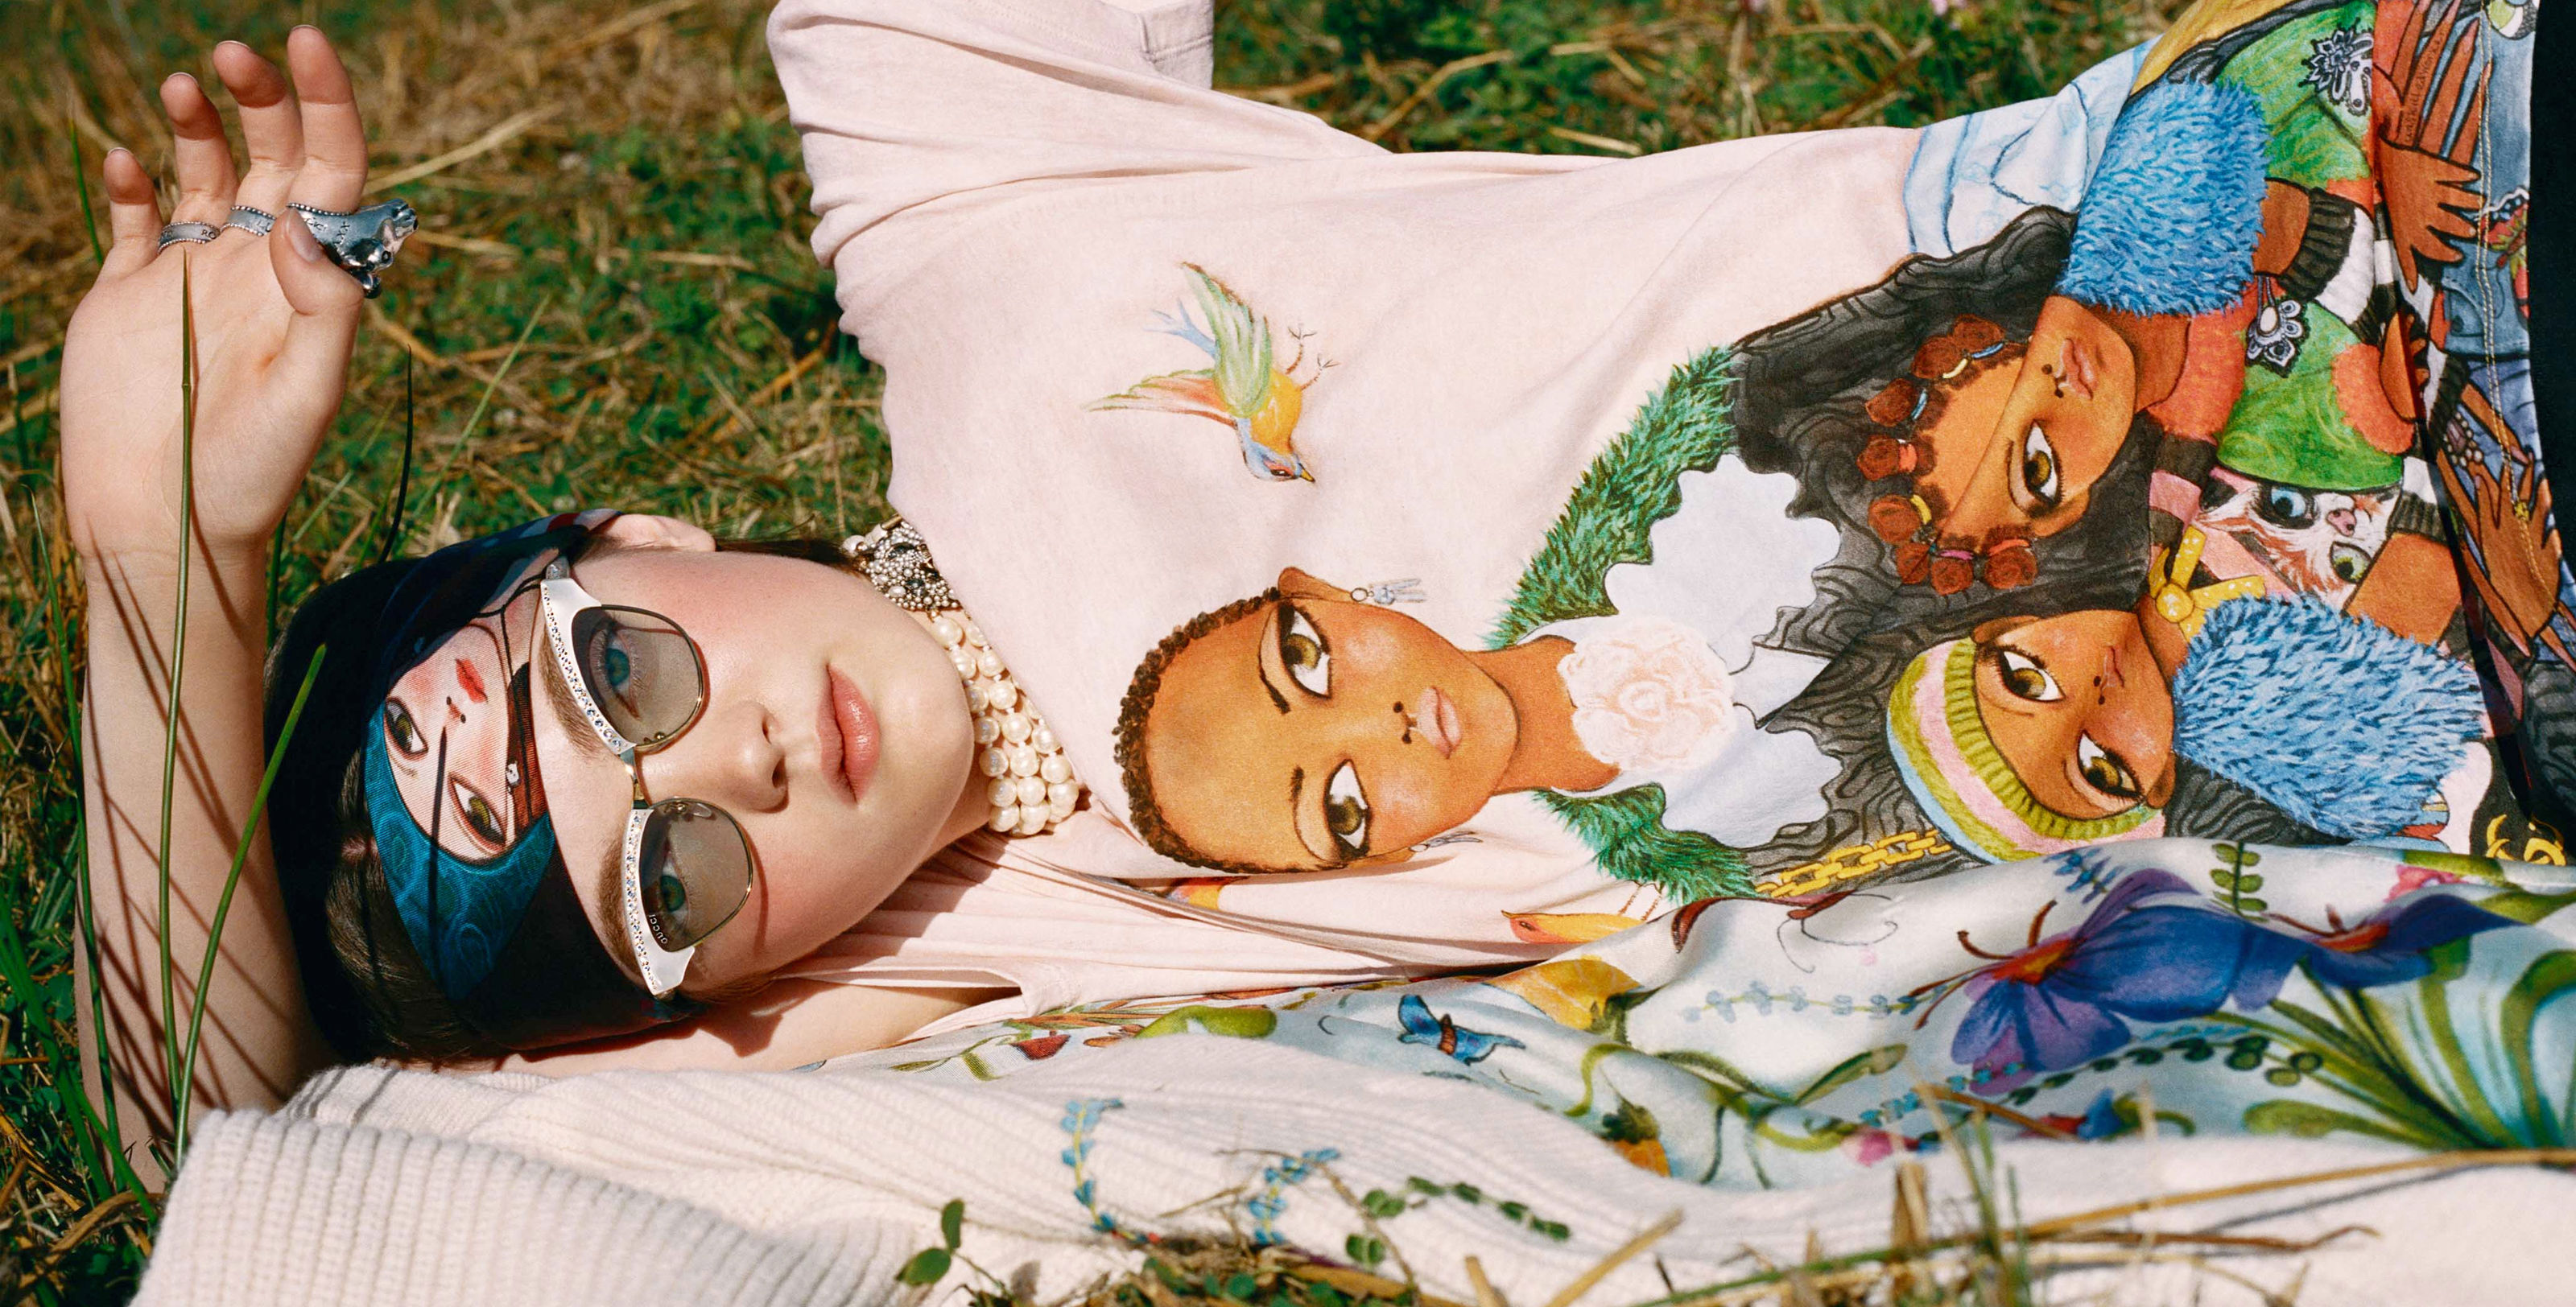 Gucci’s new capsule collection is our favourite kind of whimsical heaven